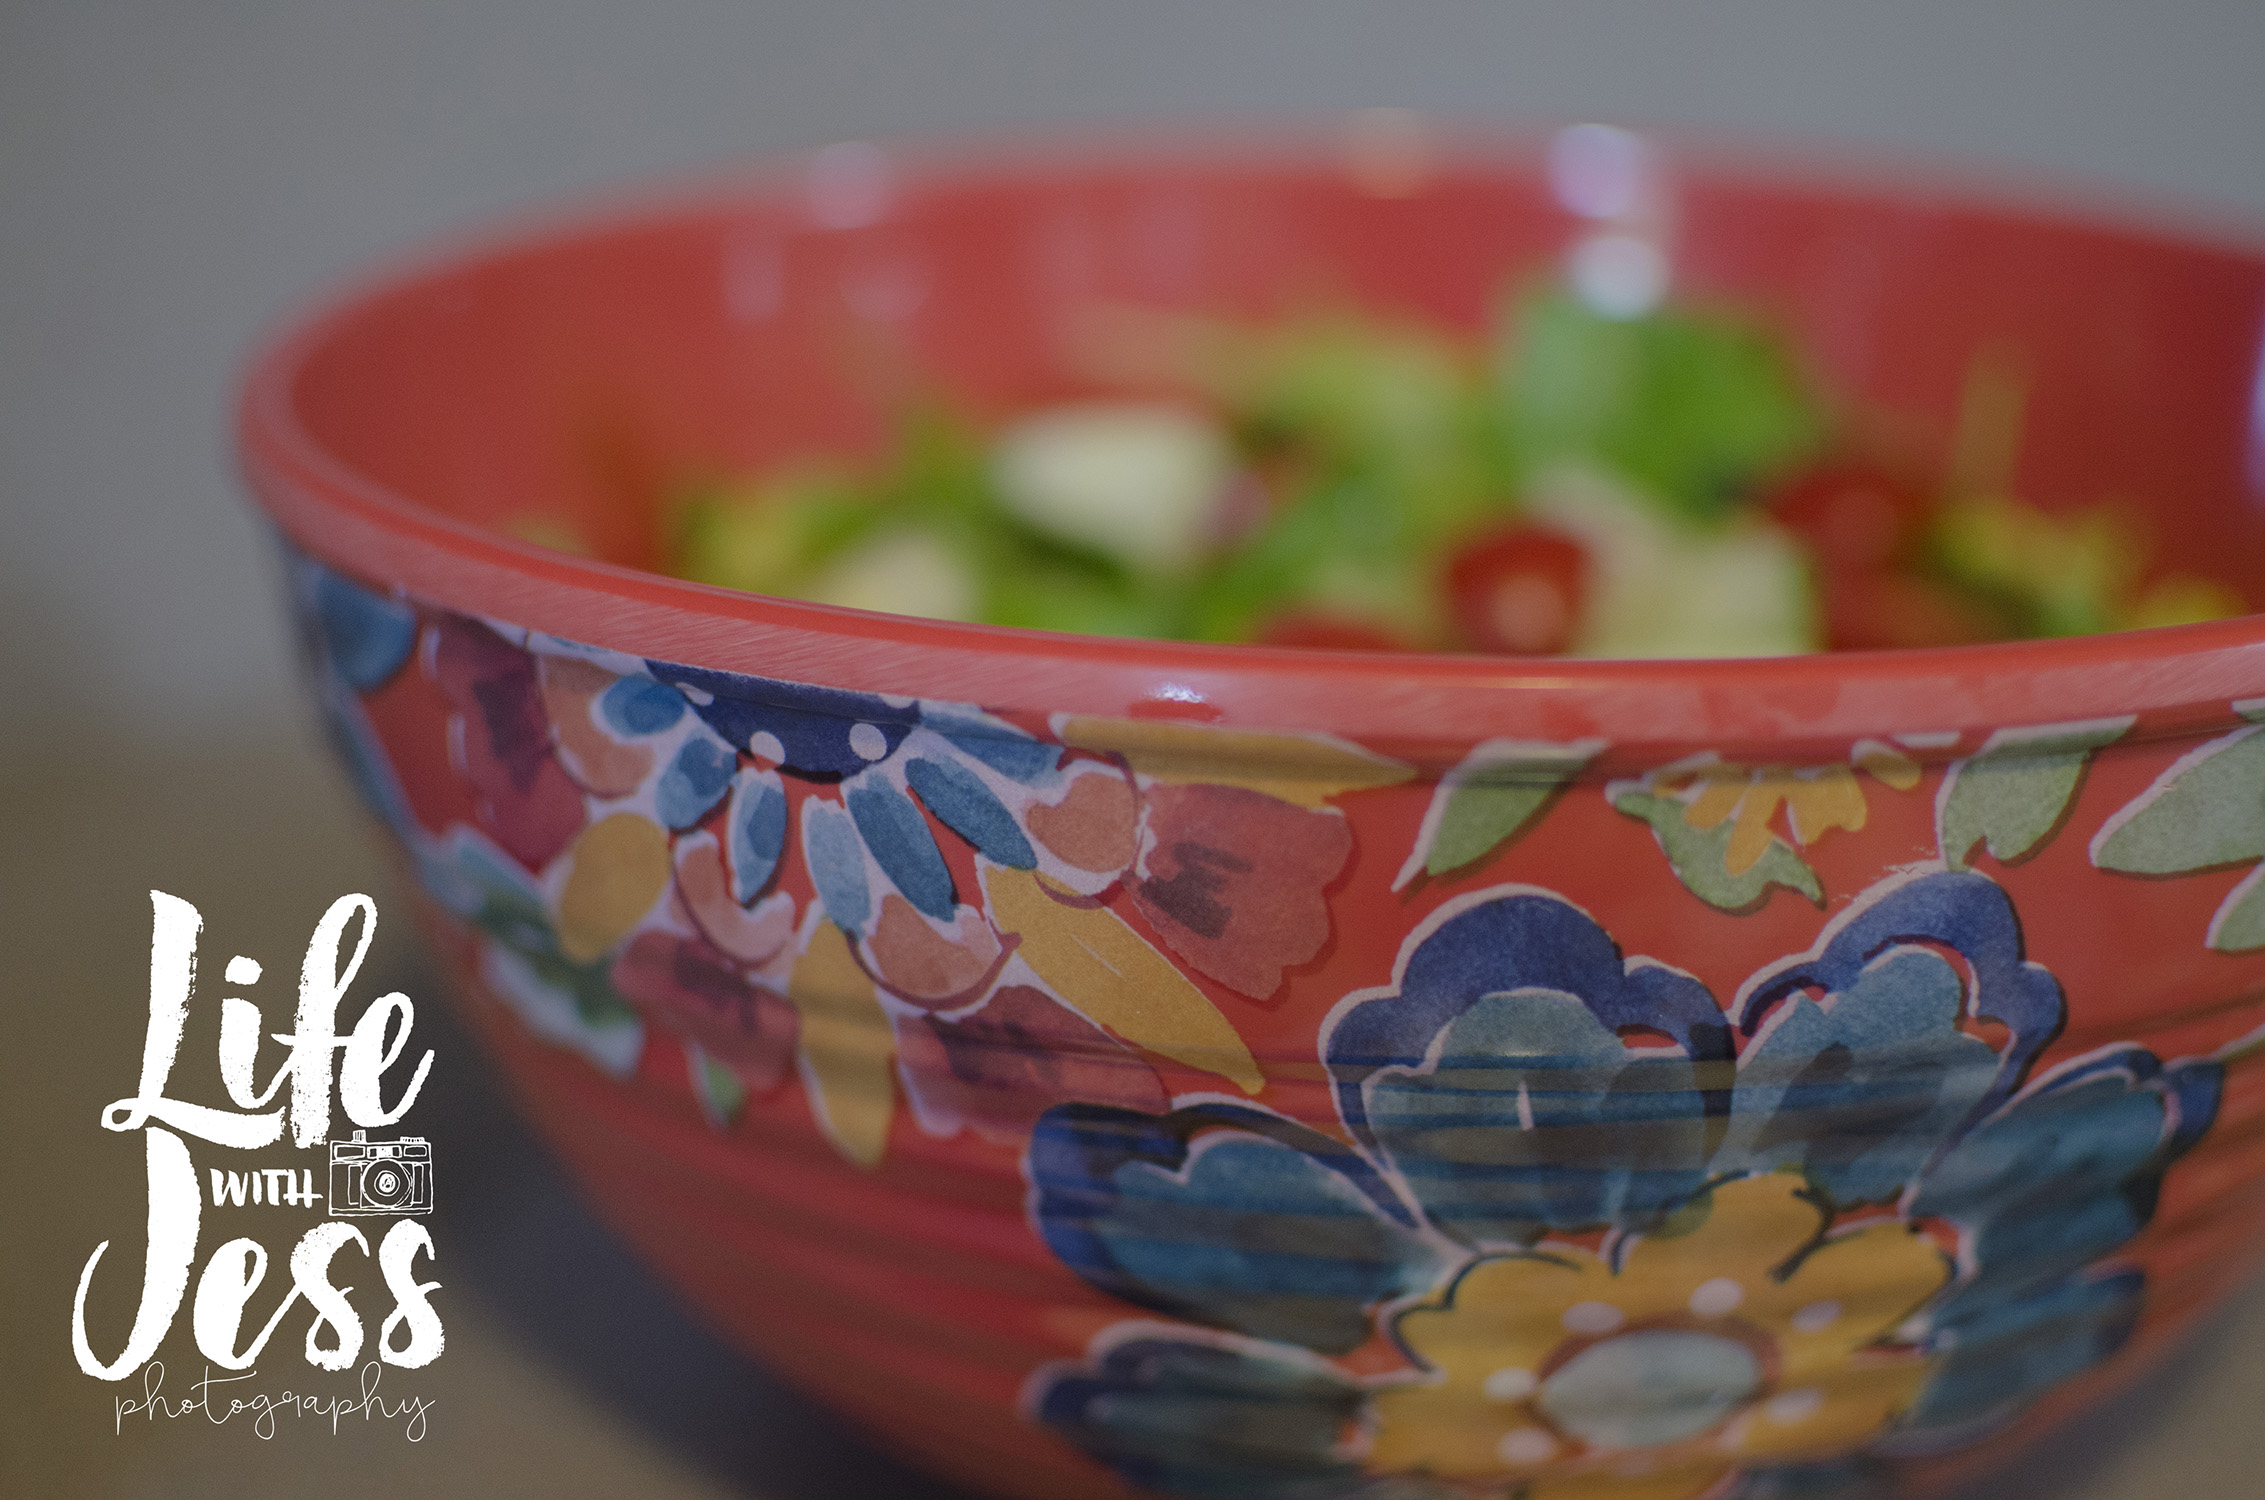 Why You Need a Fancy Salad Bowl - Life With Jess Photography